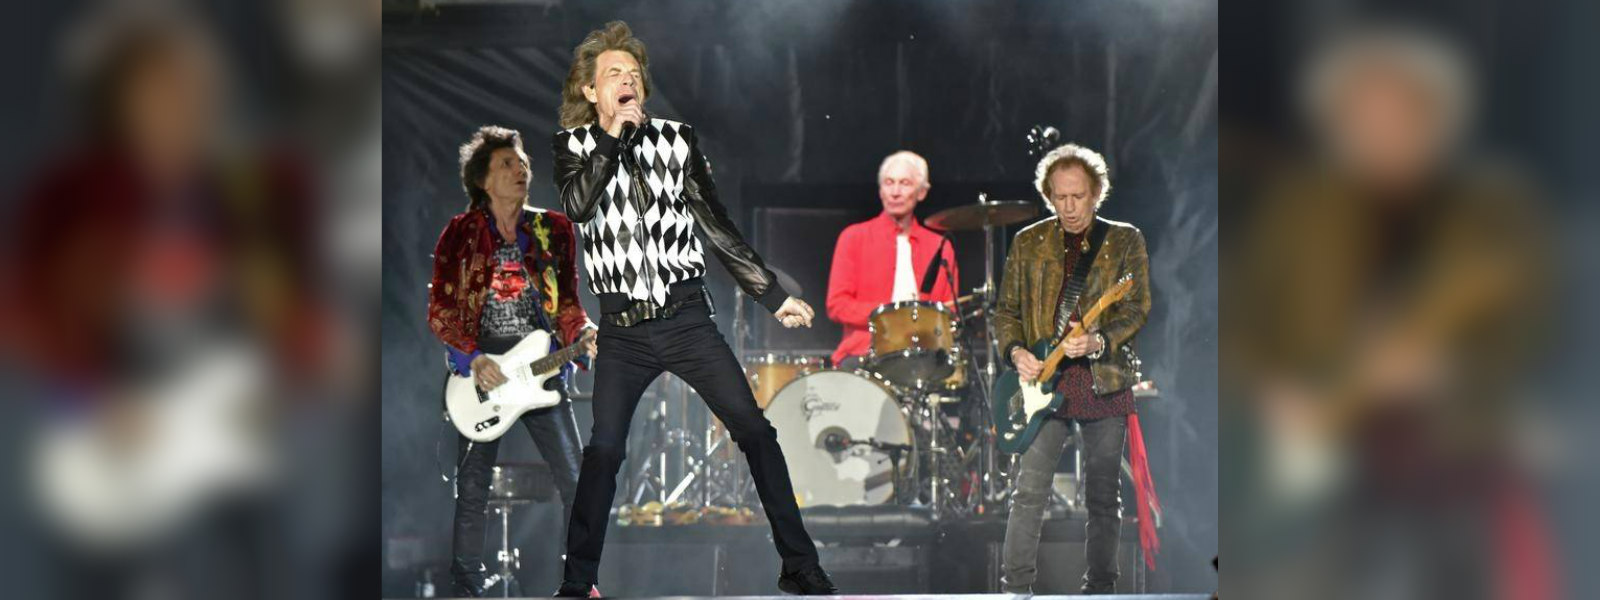 Mick Jagger back on stage following heart surgery 